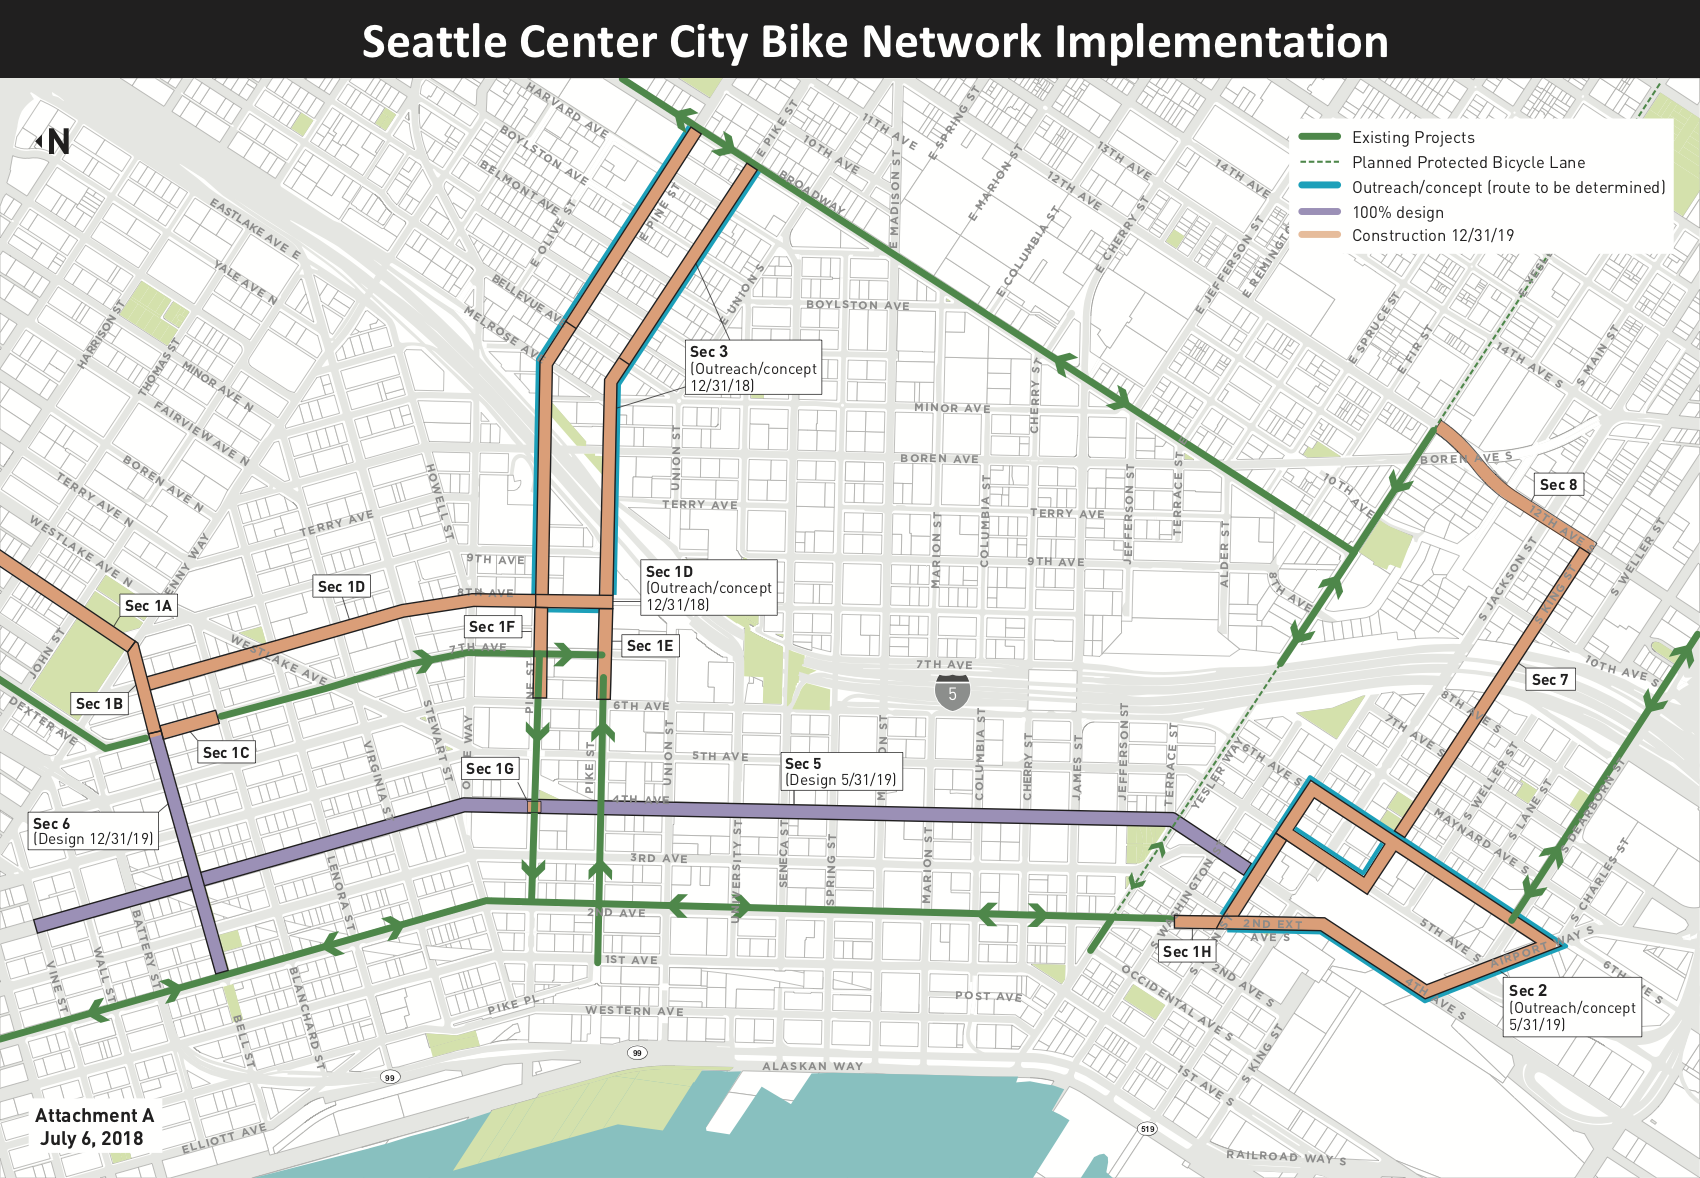 The implementation plan for the Seattle Center City Bike Network. (City of Seattle)